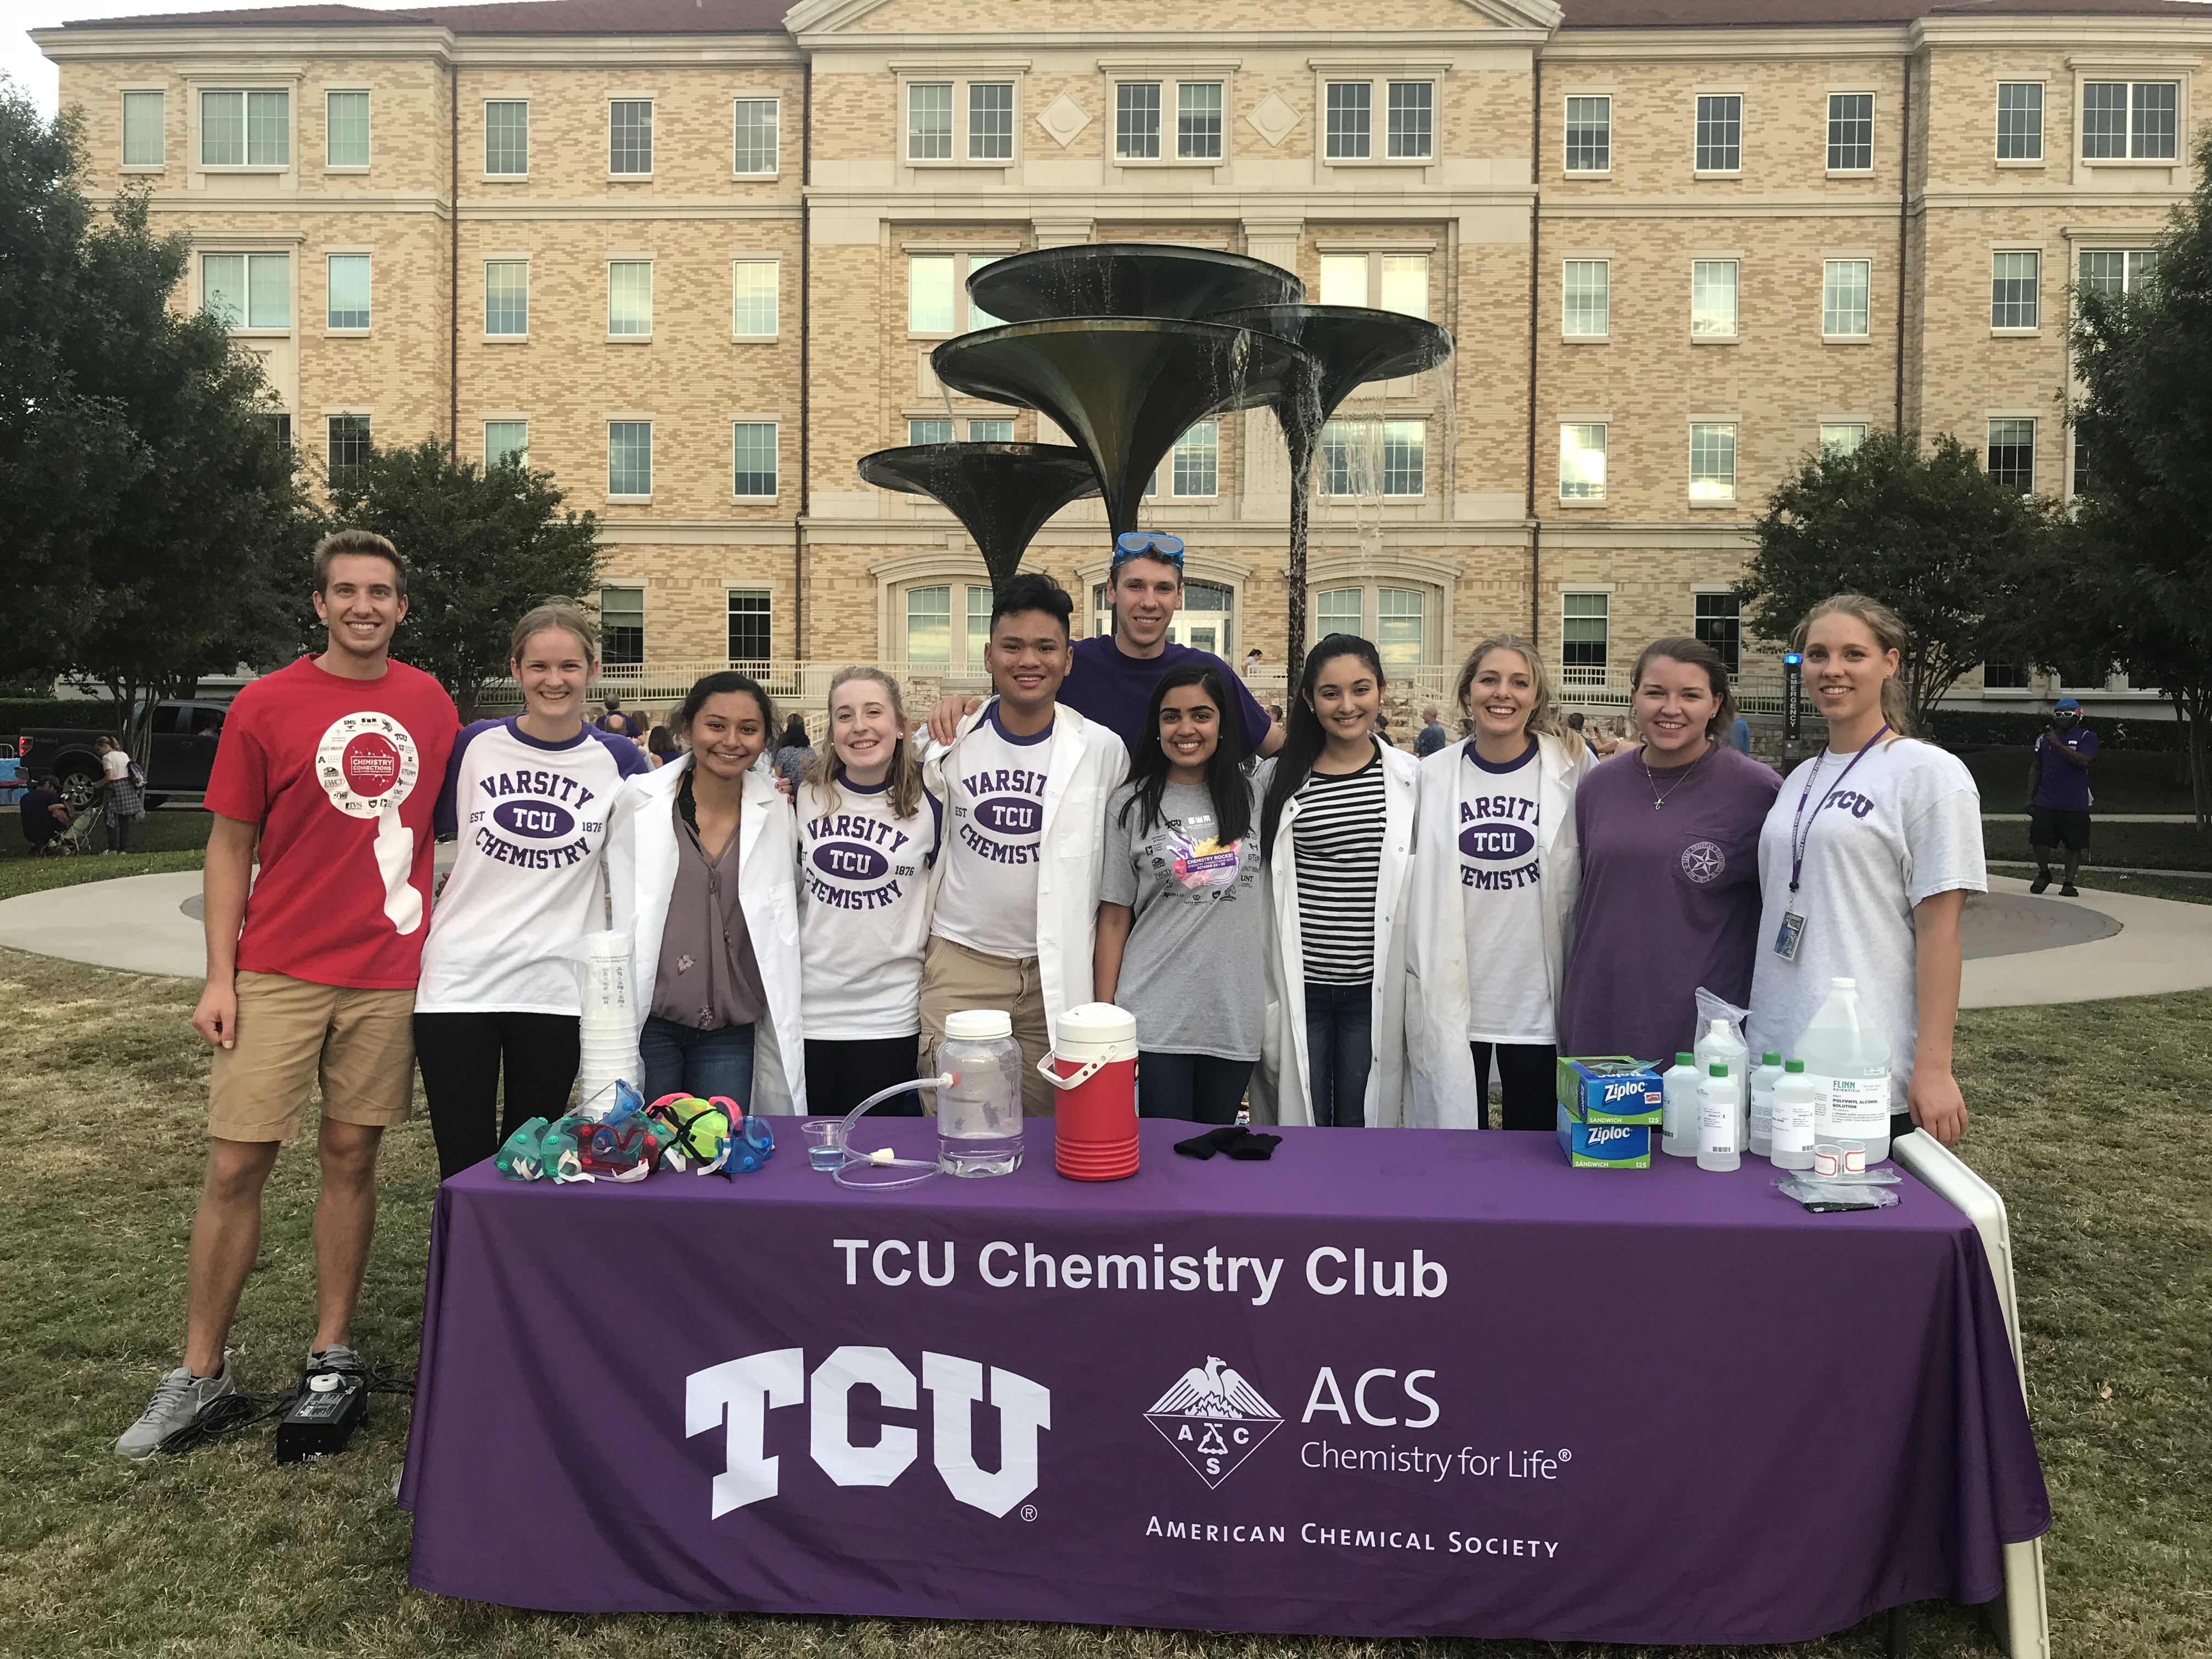 Chemistry Club is very active on the TCU campus providing activities for TCU students, families, and fans throughout the year.
                  